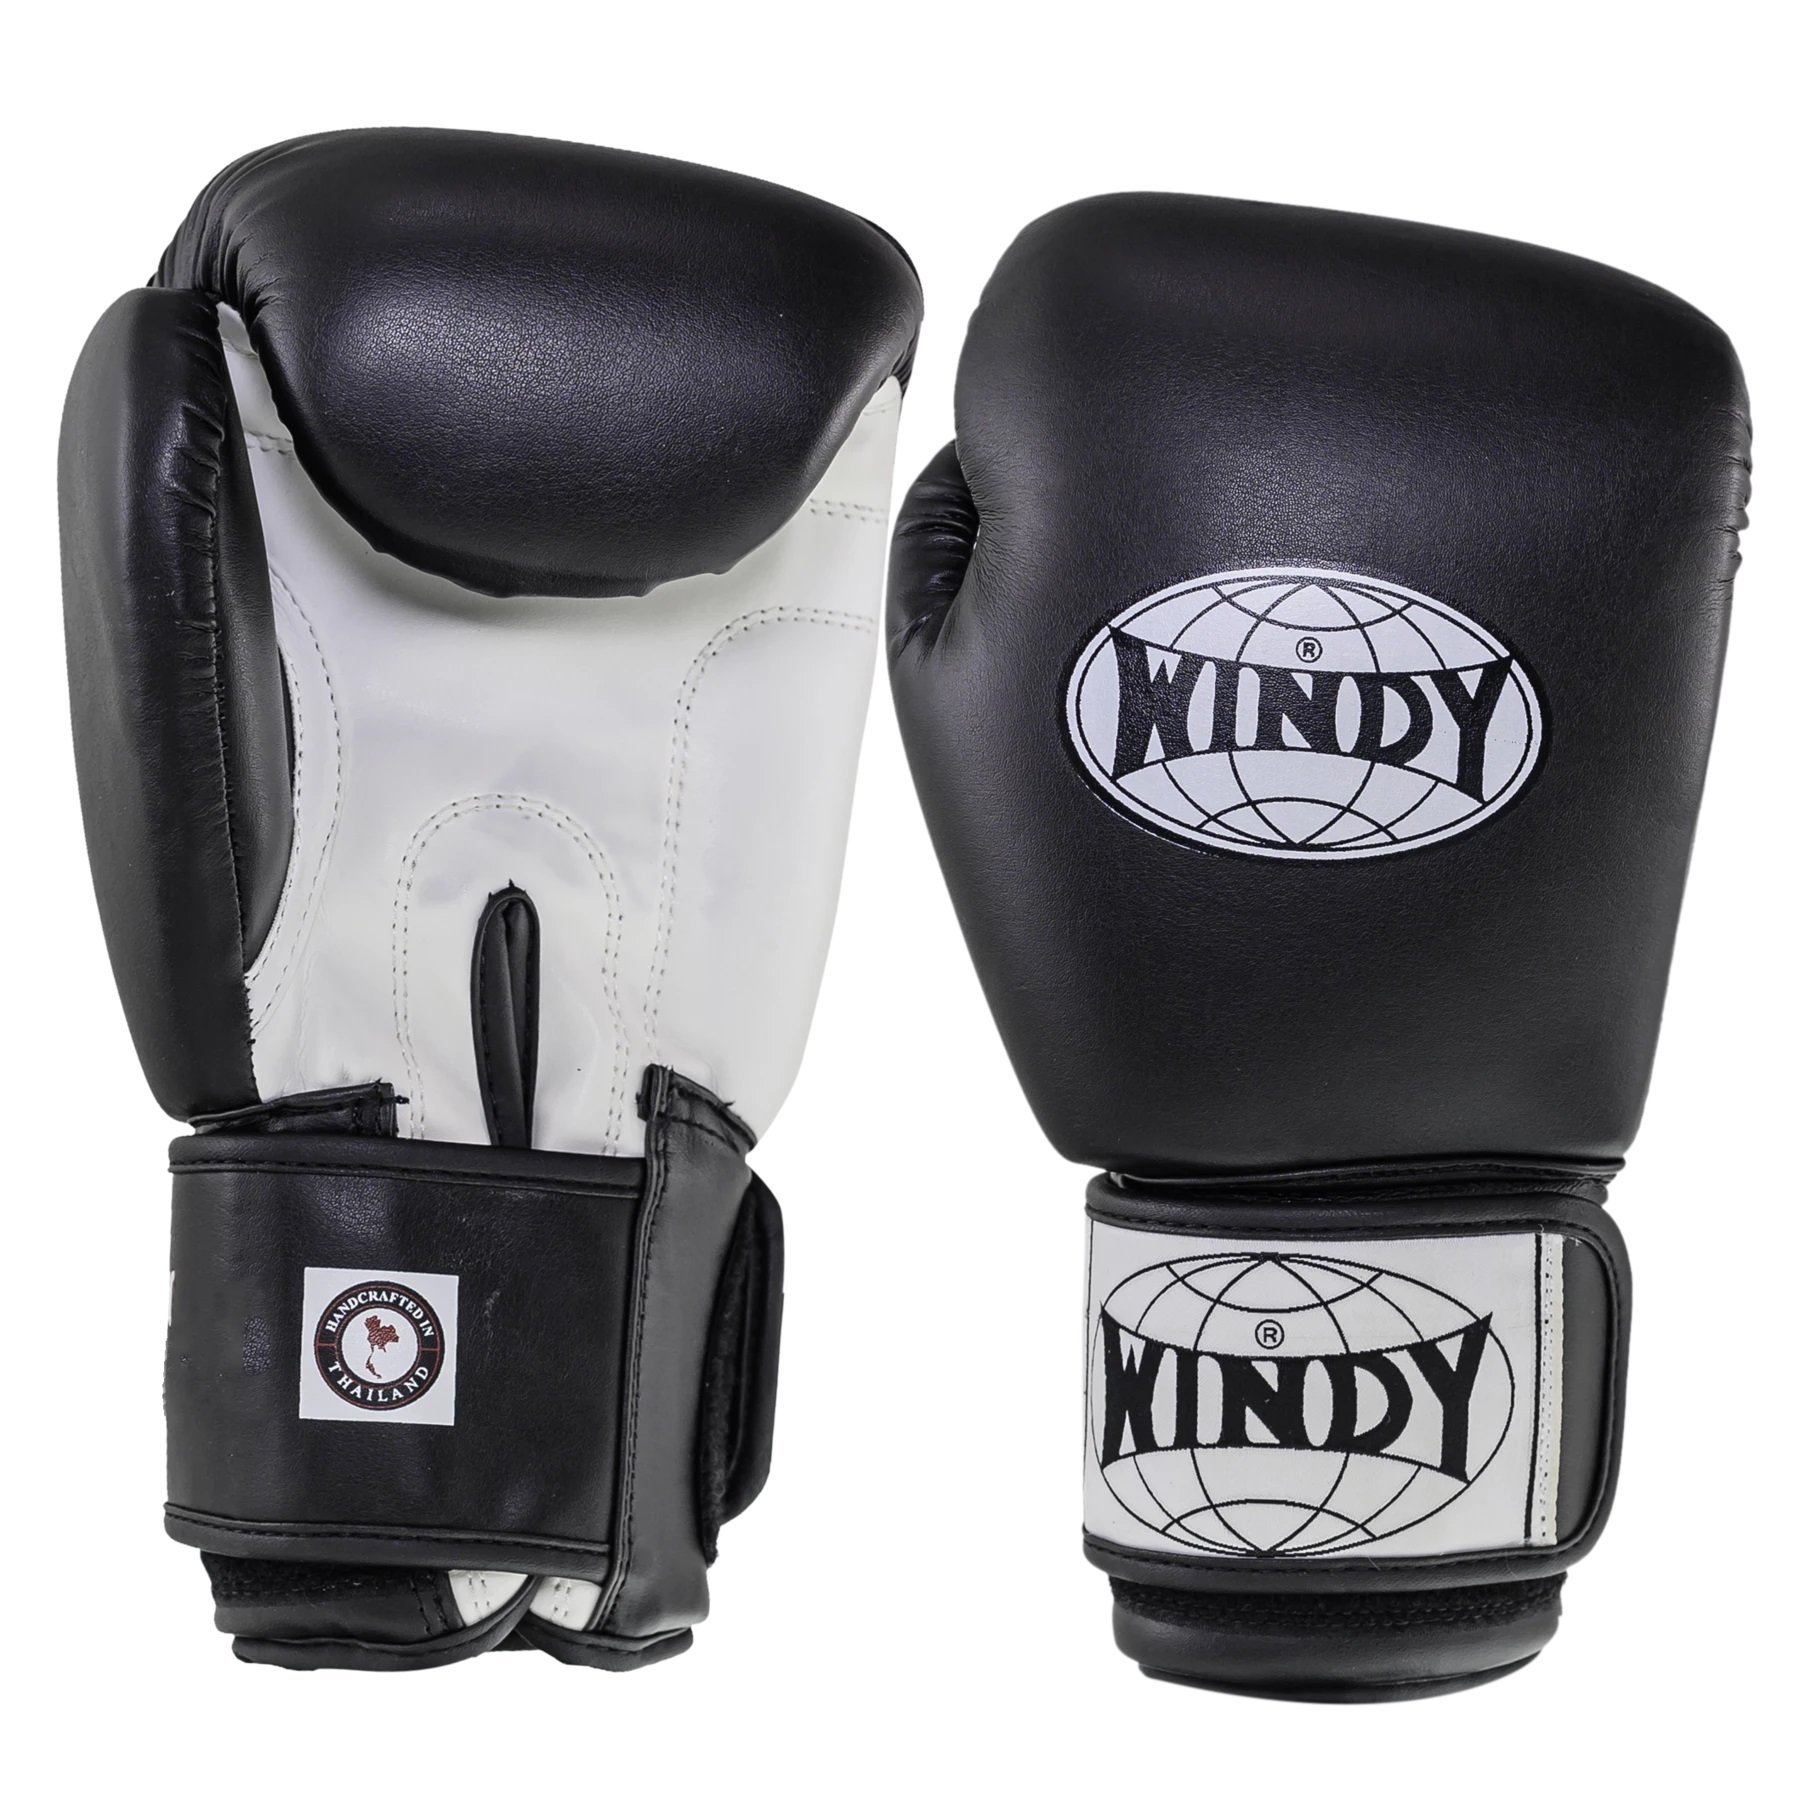 BOXING GLOVES FOR KIDS WINDY